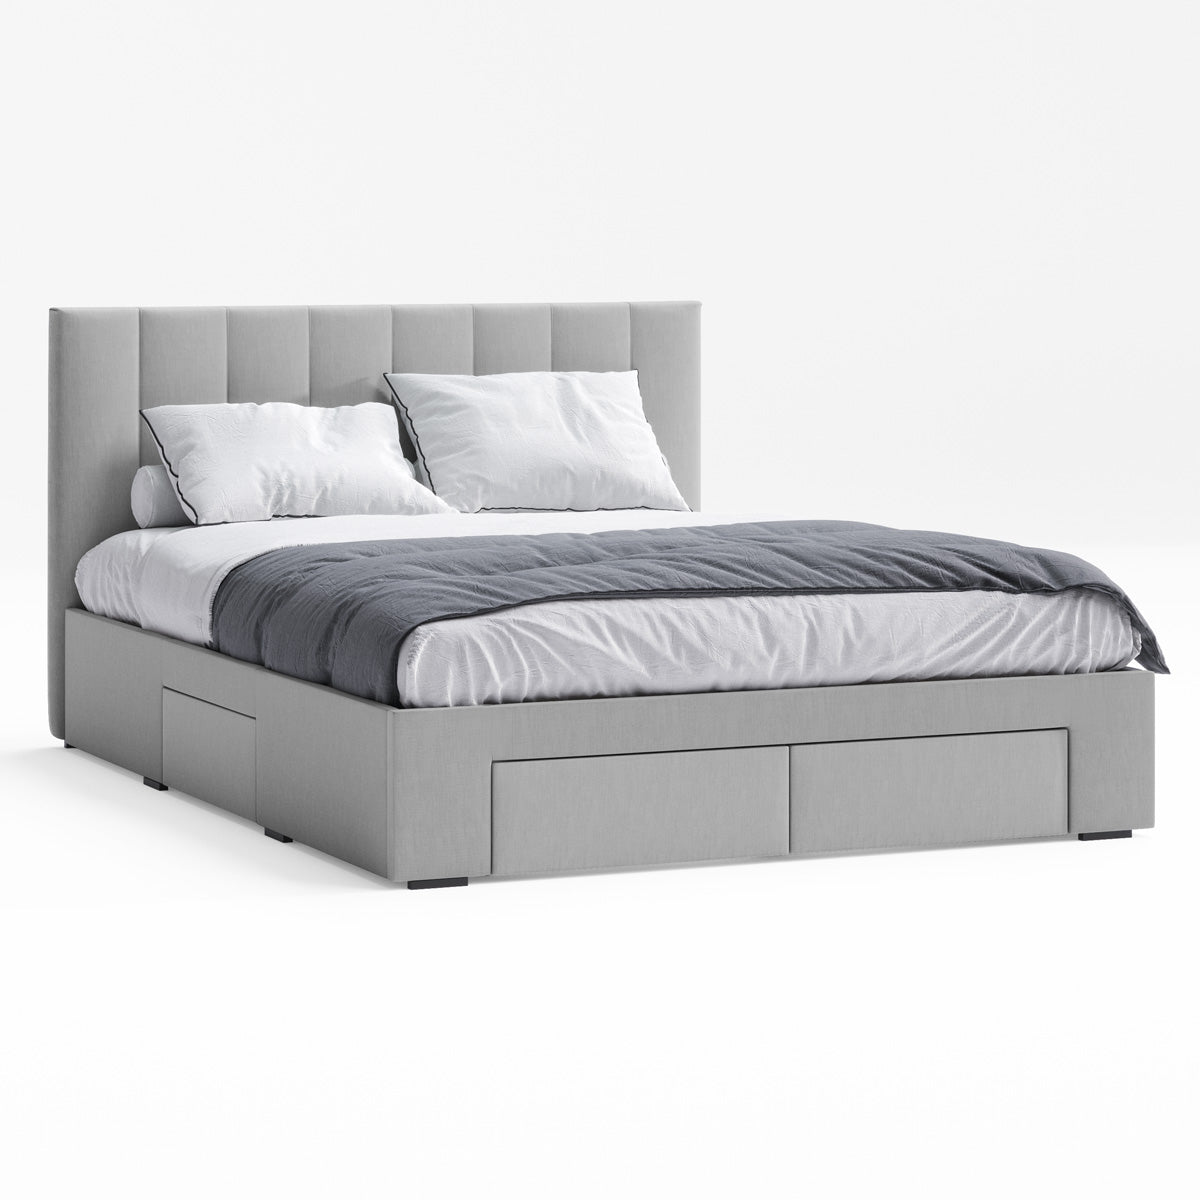 Ormond Storage Bed Frame with Four Extra Large Drawers (Grey Fabric)